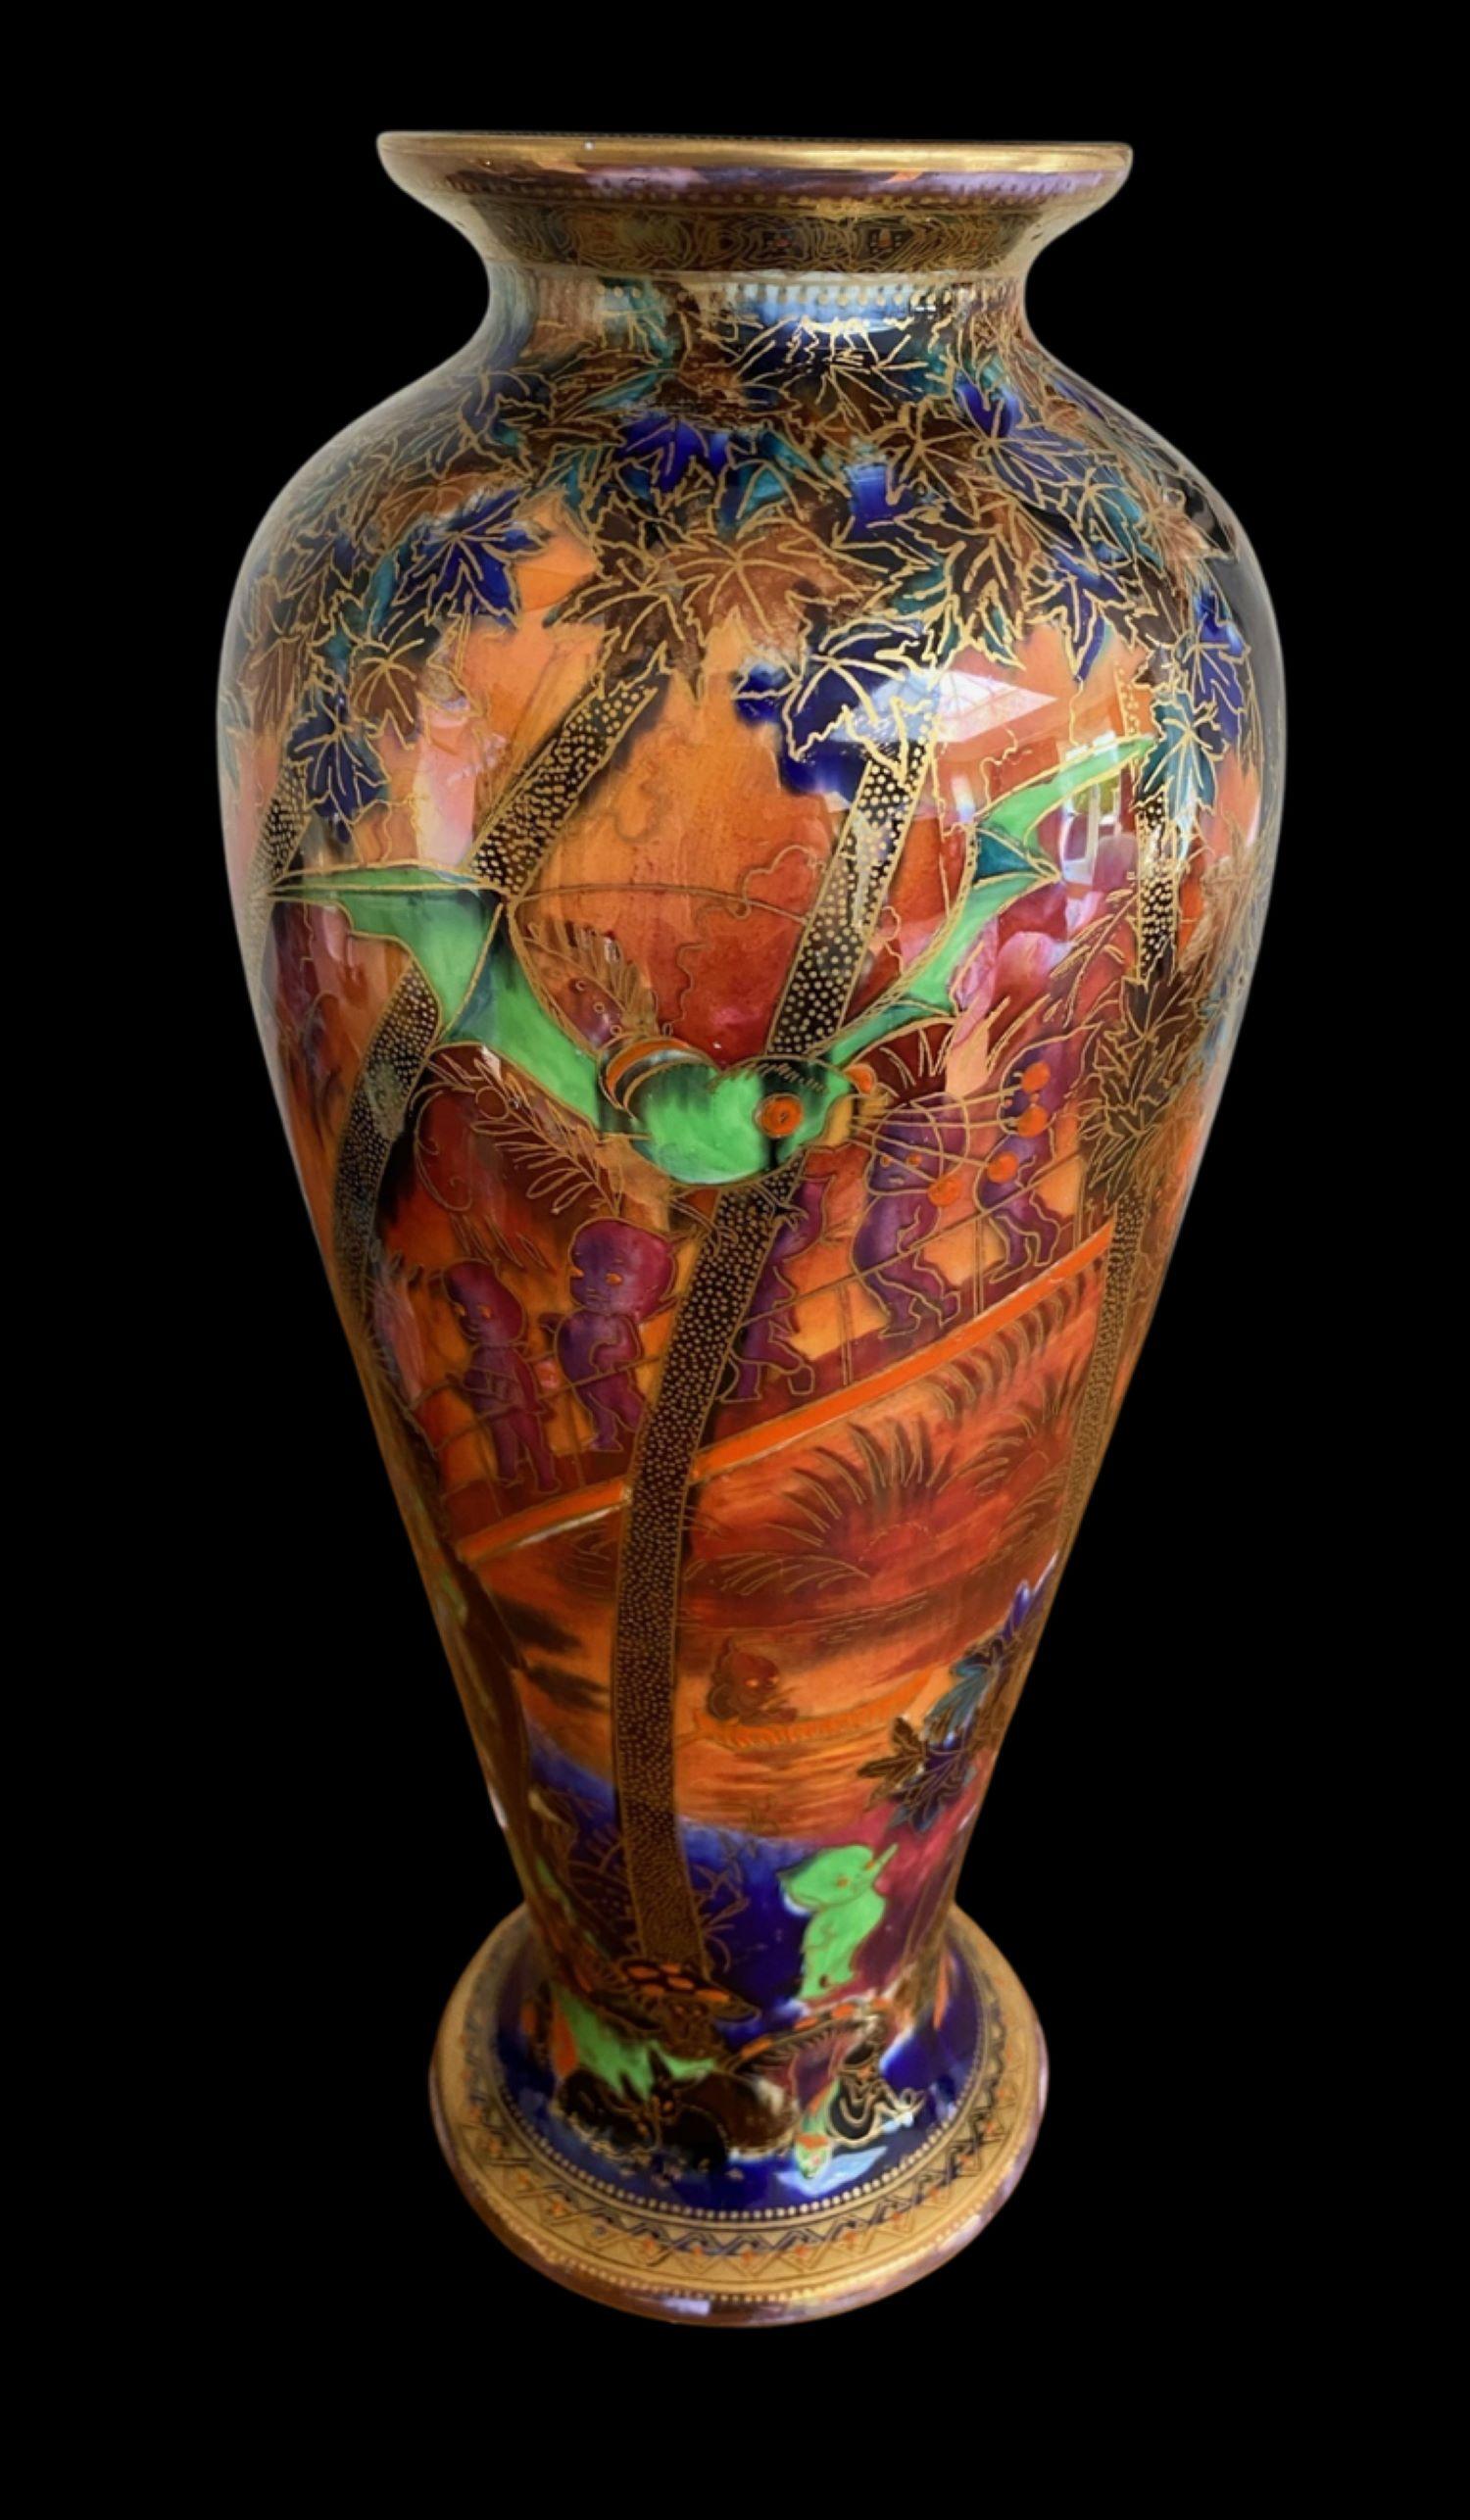 5158

Wedgwood Fairyland Lustre Vase by Daisy Makeig Jones decorated with “Imps on a Bridge” design in the Flame colourway

Circa 1920

Measures: 26.5cm high.